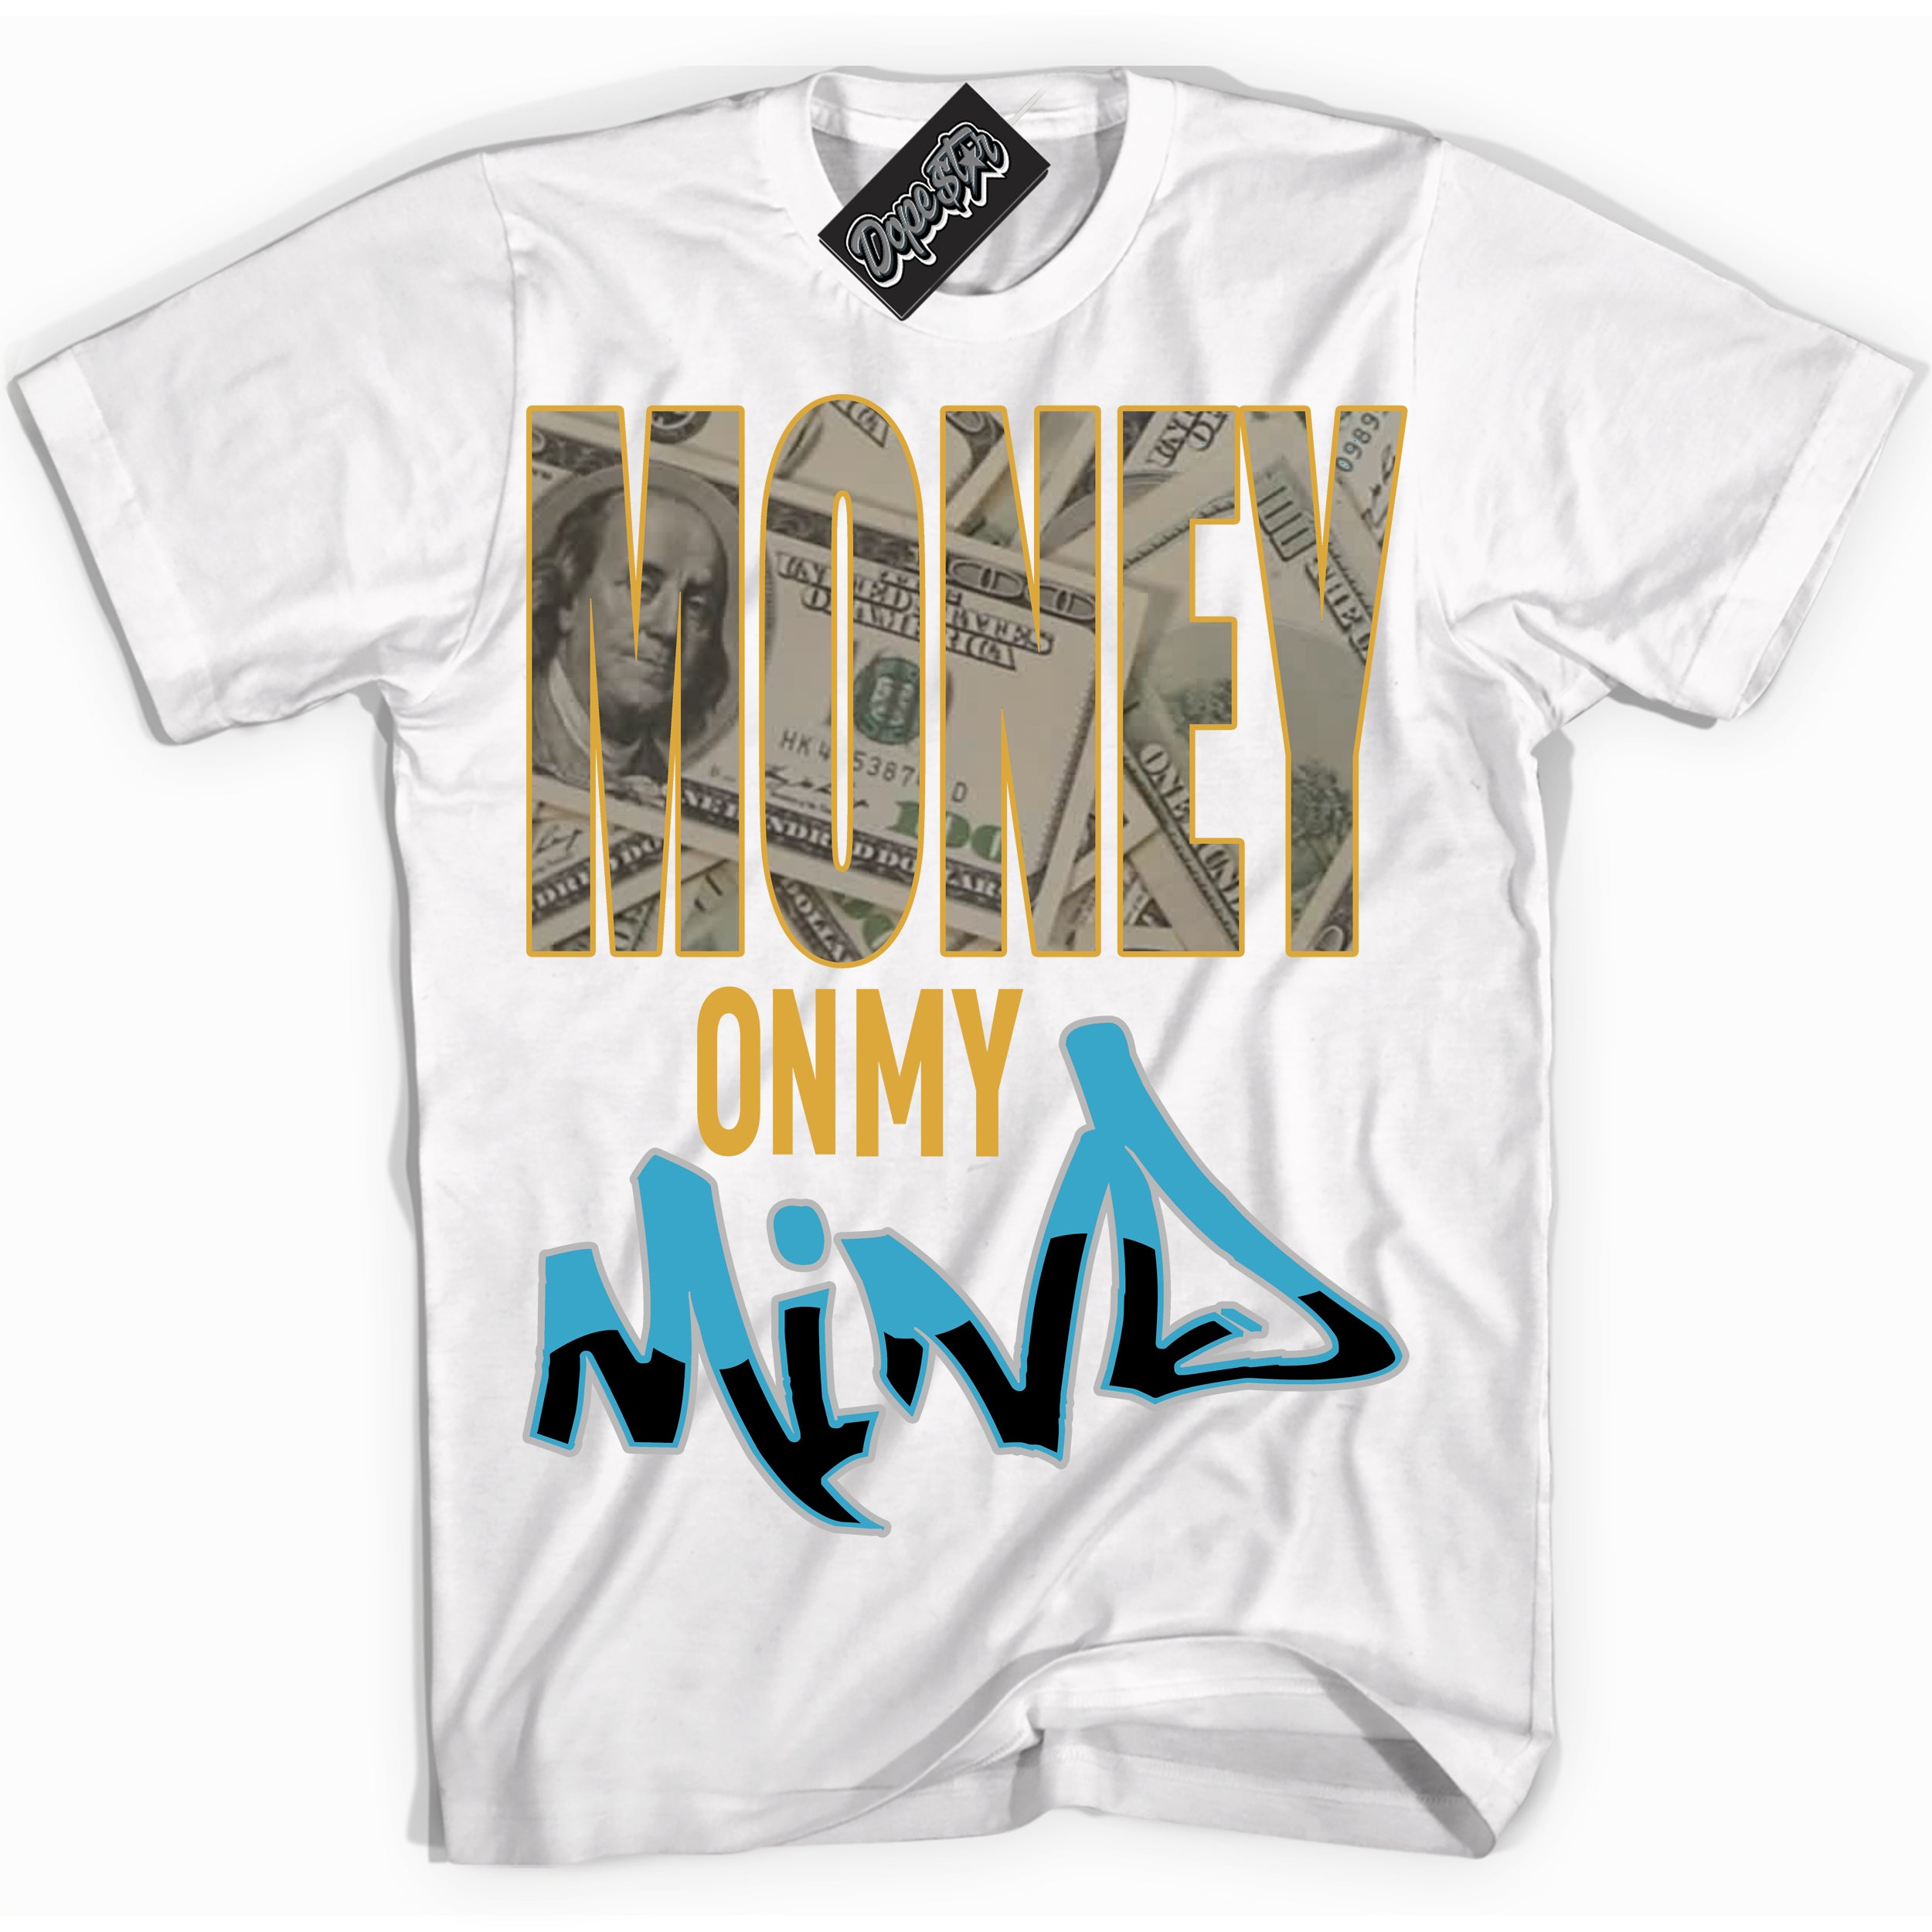 Cool White Shirt with “ Money On My Mind” design that perfectly matches Aqua 5s Sneakers.